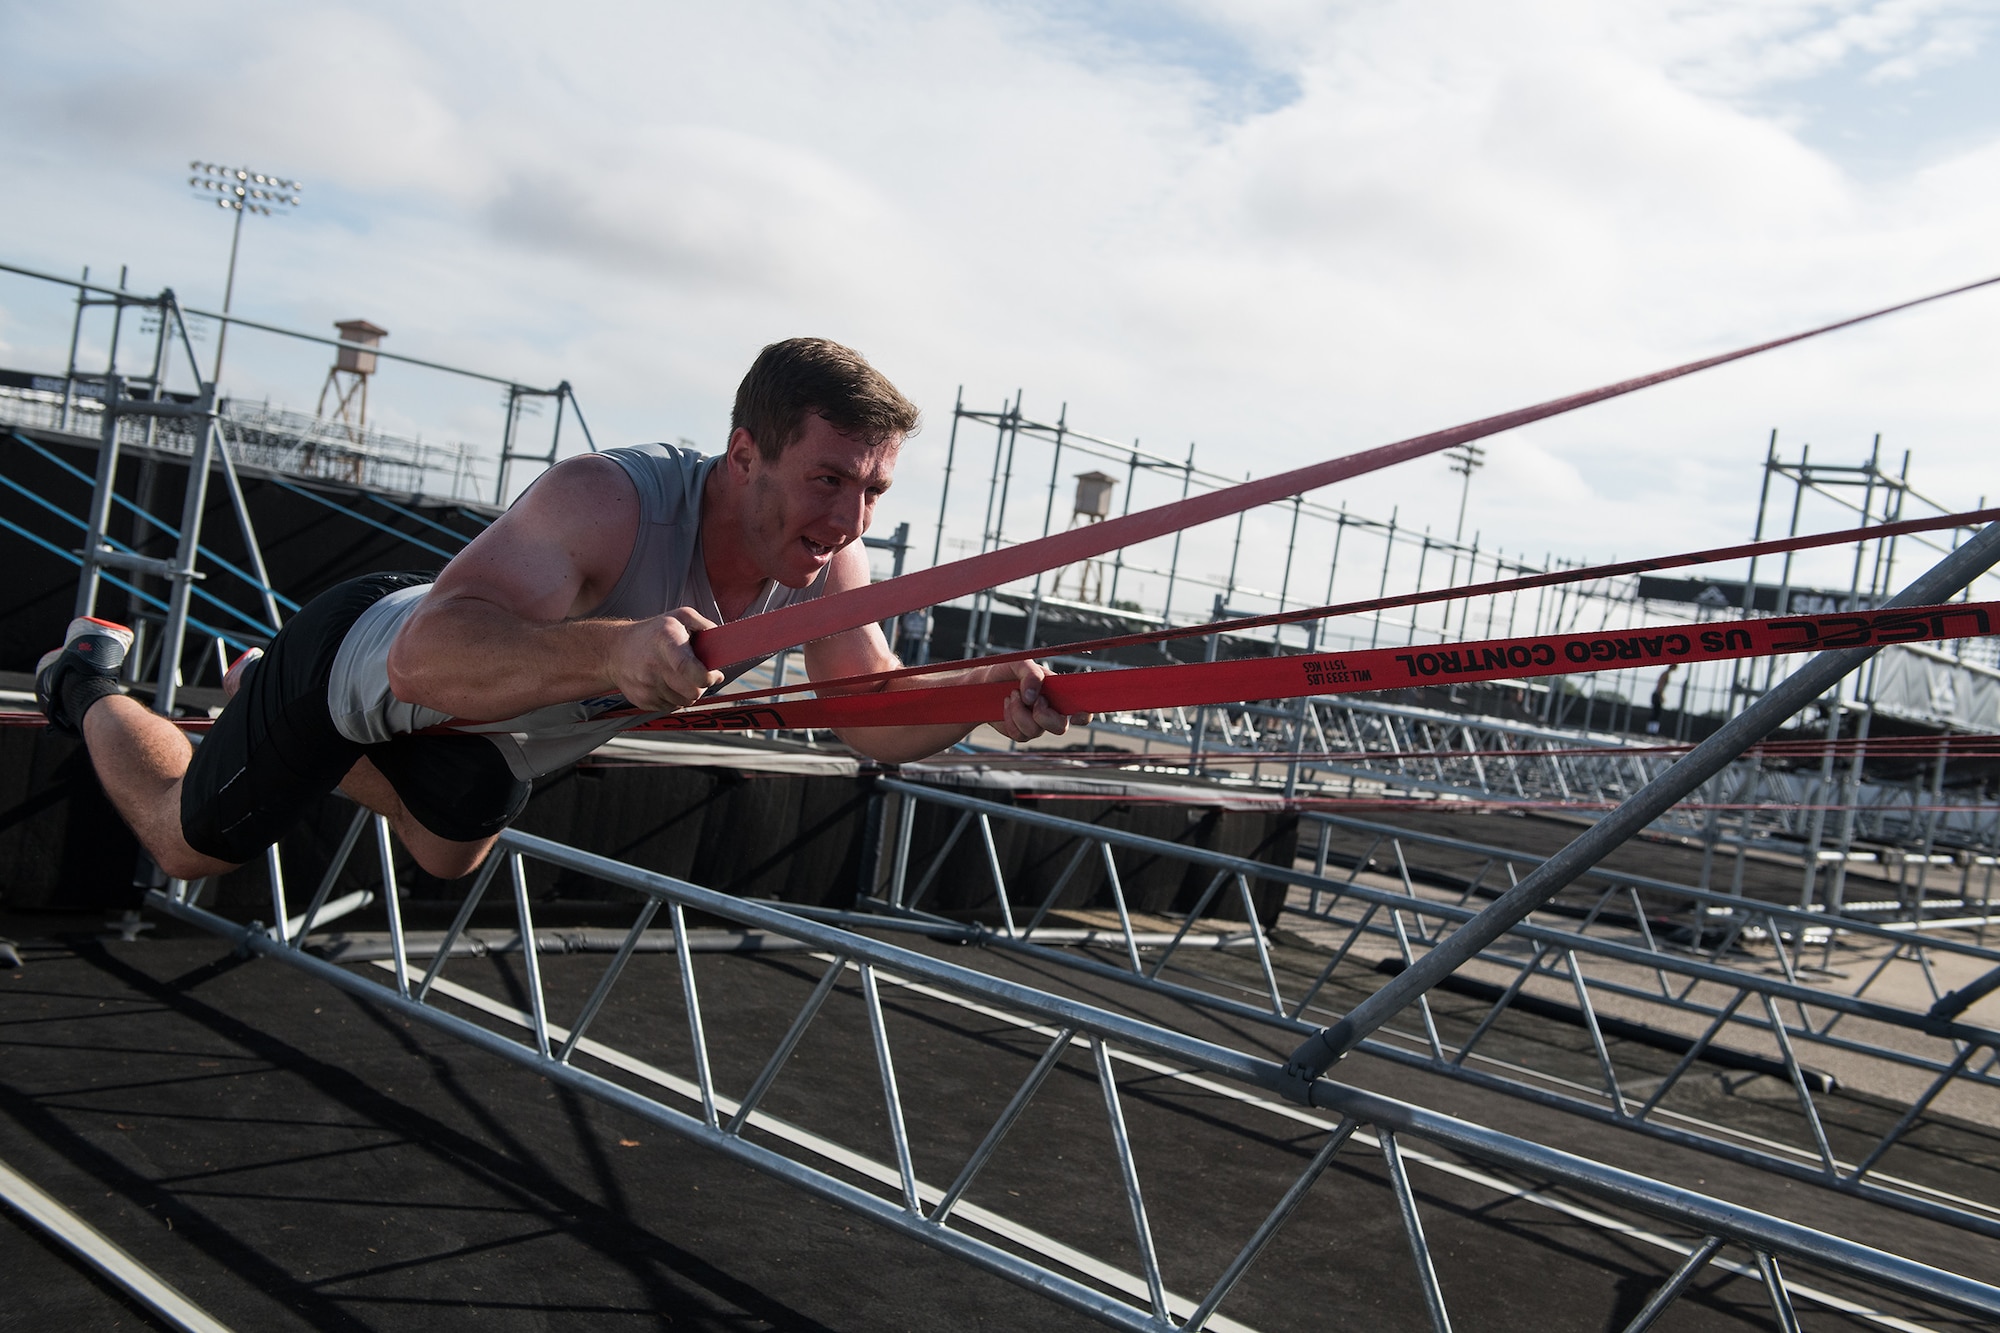 2nd Lt. Jesse Montgomery takes on an obstacle during the 2019 Air Force Alpha Warrior Final Battle at Retama Park, Selma, Texas, Sept. 12, 2019. Air Force, Army and Navy military athletes competed against each other to determine the top three men and three women for each service. Those athletes make up the service teams that will go against each other during the 2019 Inter-Service Battle Sept. 14 at Retama. The Air Force partnered with Alpha Warrior three years ago to deliver functional fitness training to Airmen and their families. (U.S. Air Force photo by Sarayuth Pinthong)